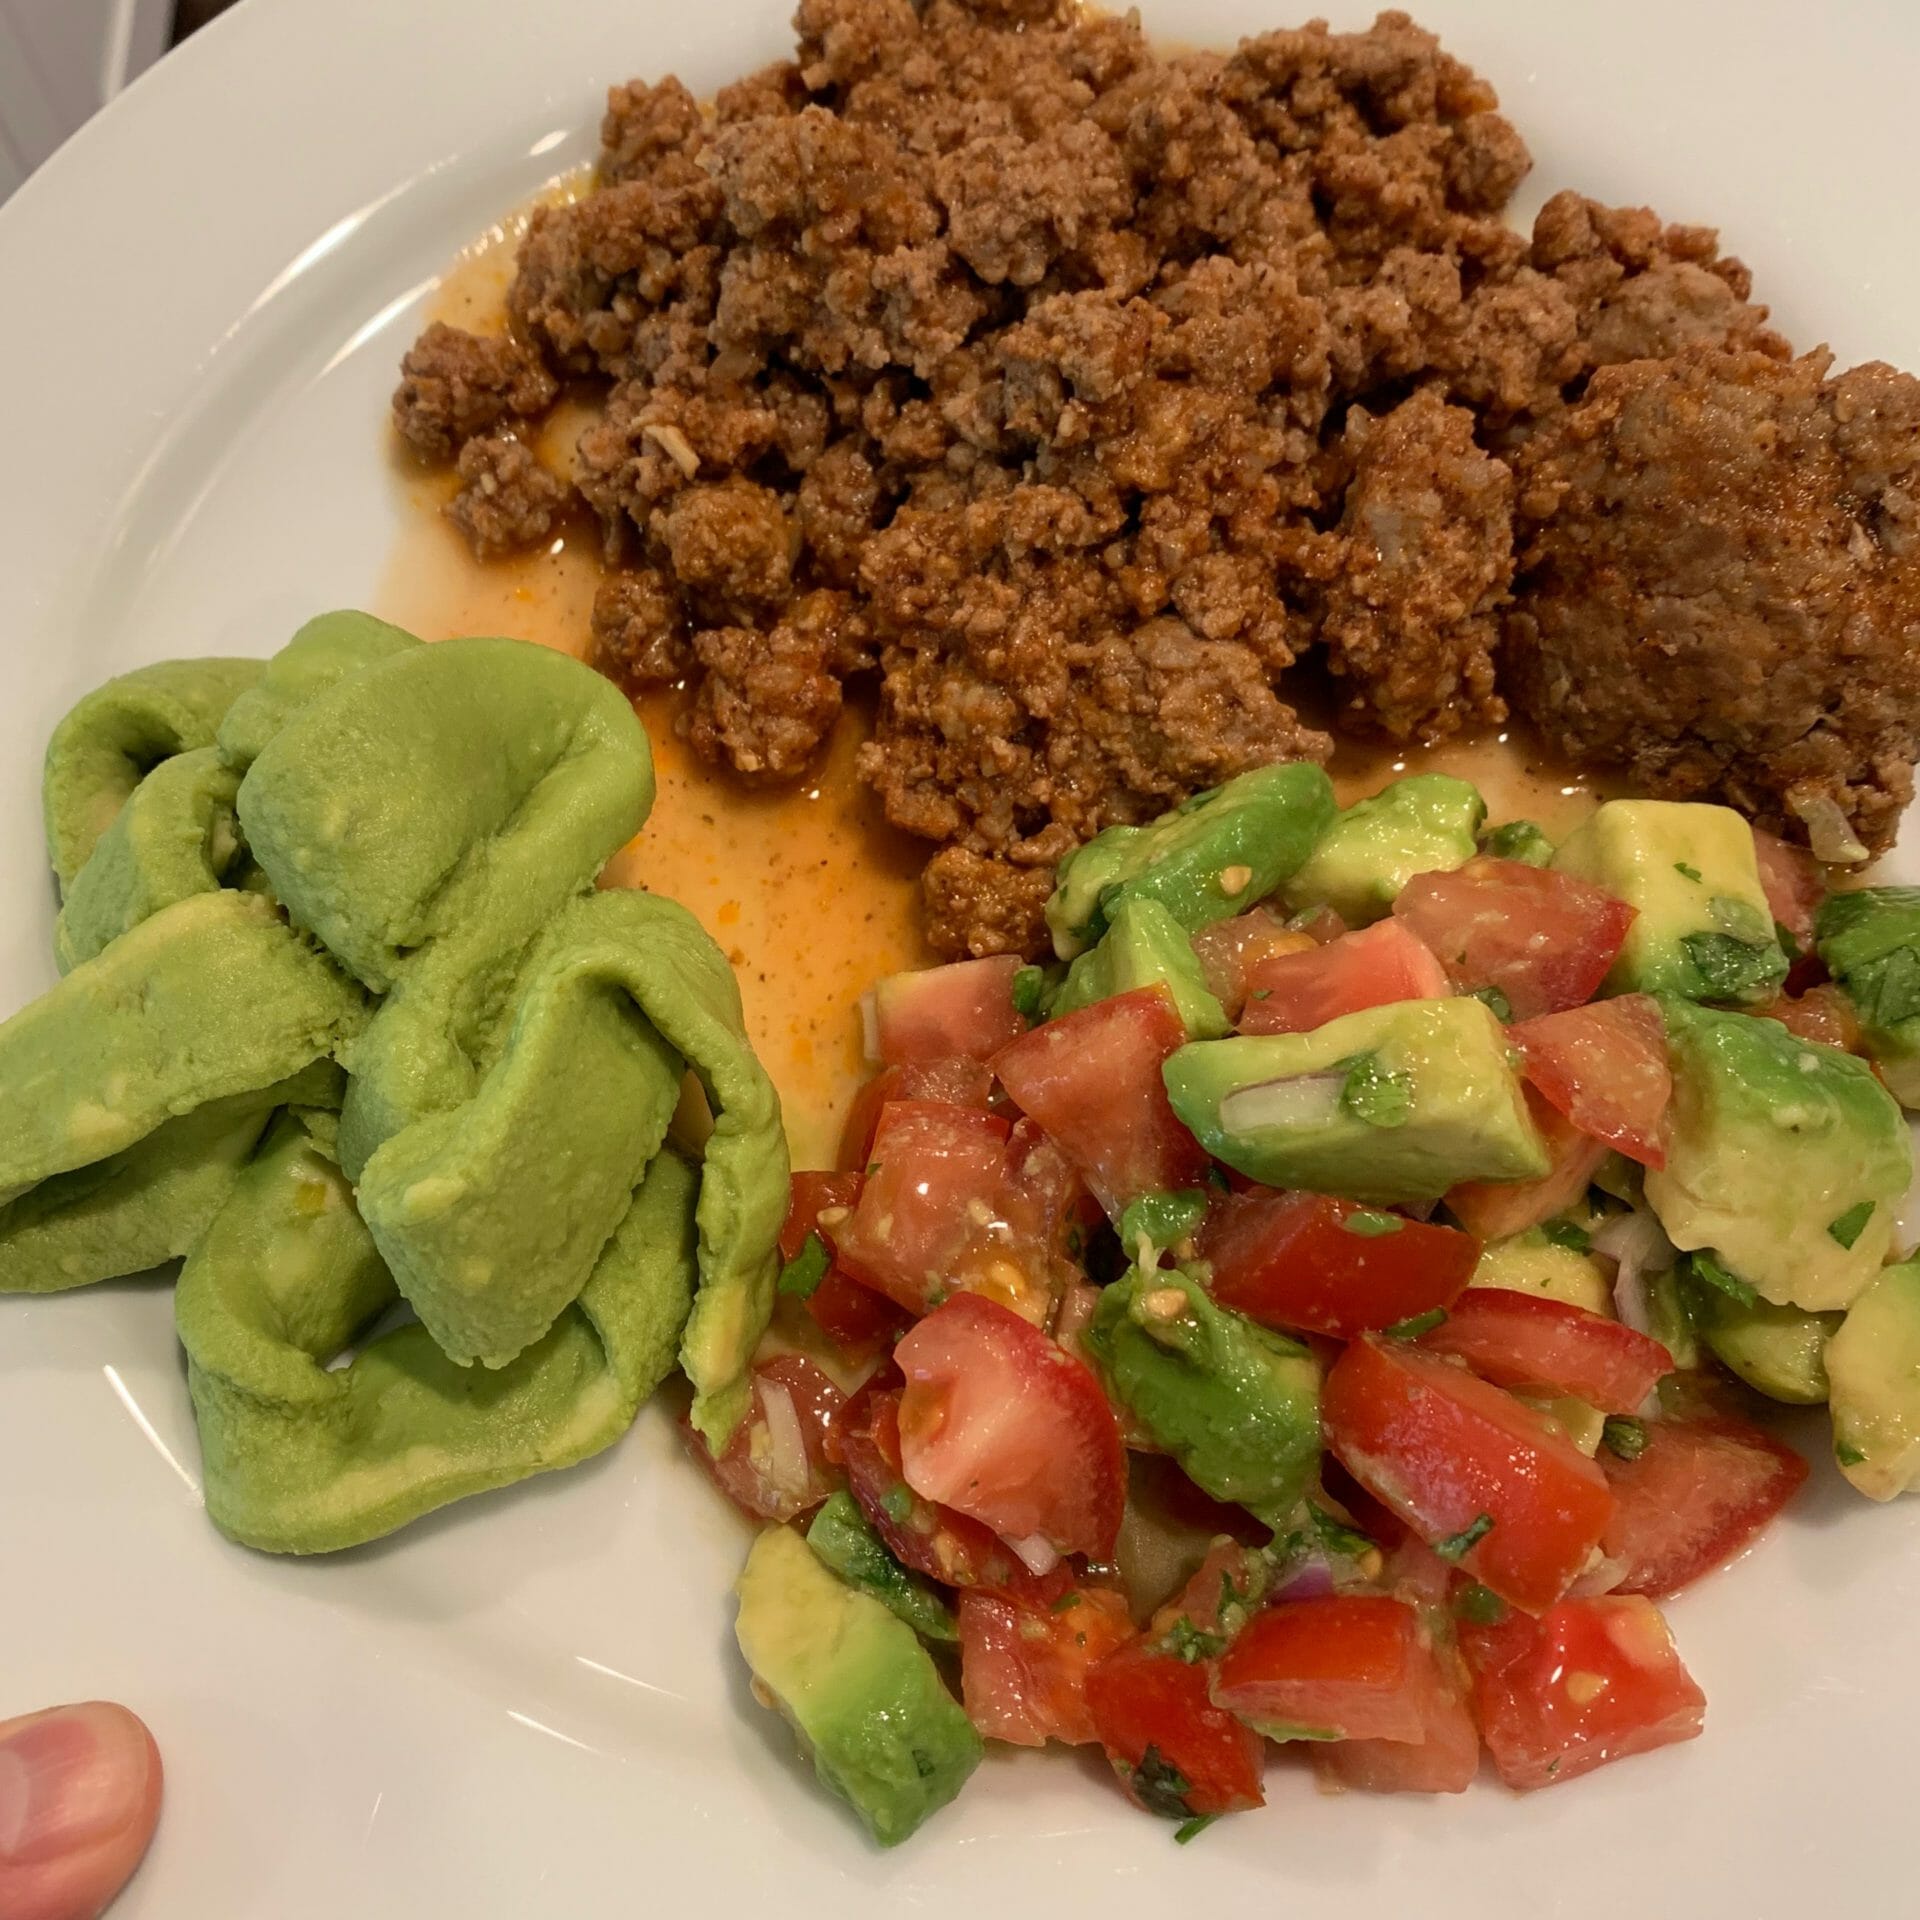 Ground meat with guacamole and avocado/tomato salad